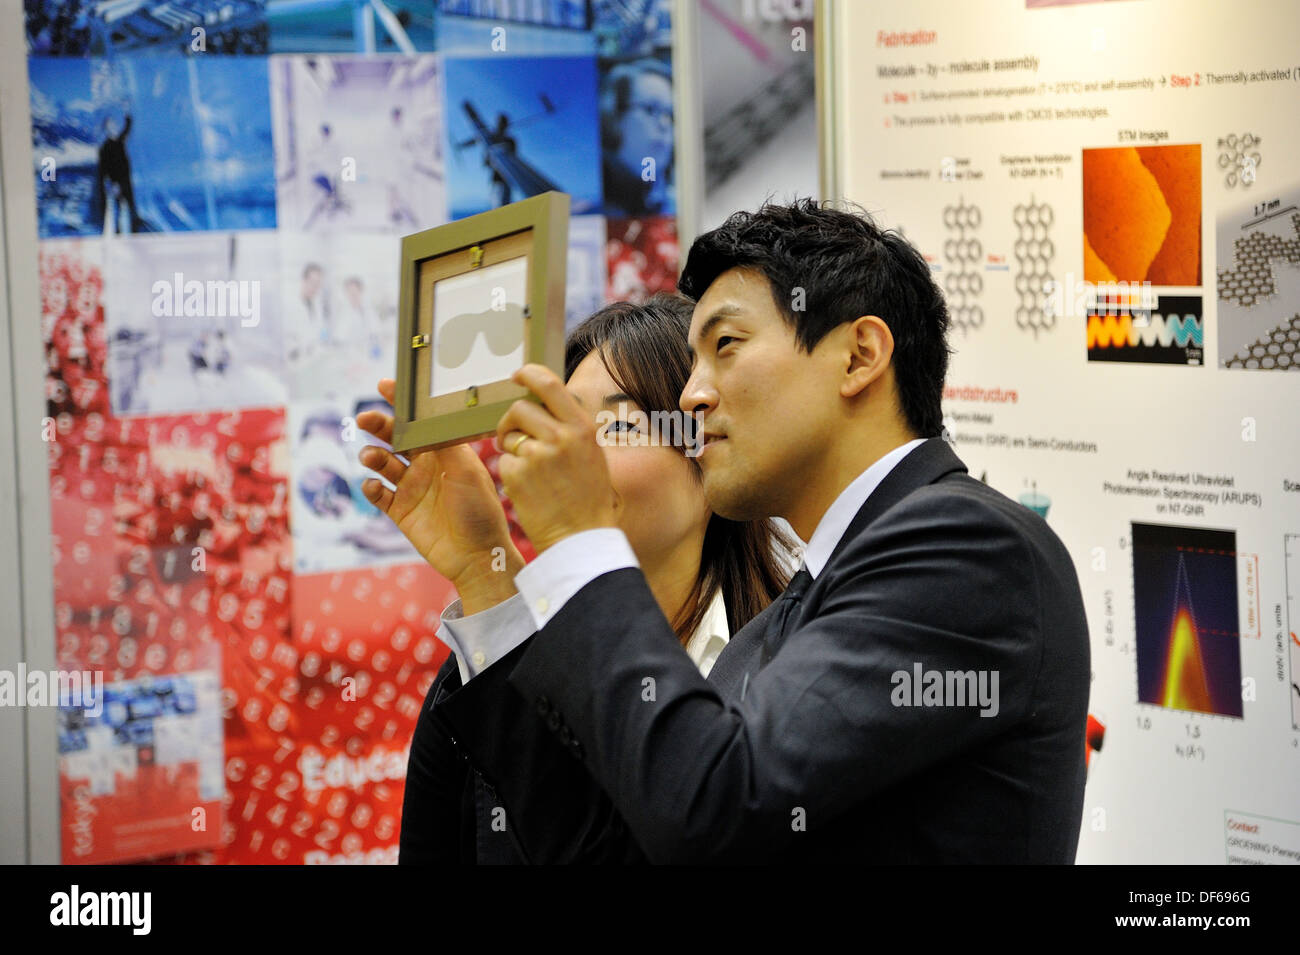 Colleagues examine a vision mask demonstrator at the Nanotech Japan trade fair in Tokyo Stock Photo